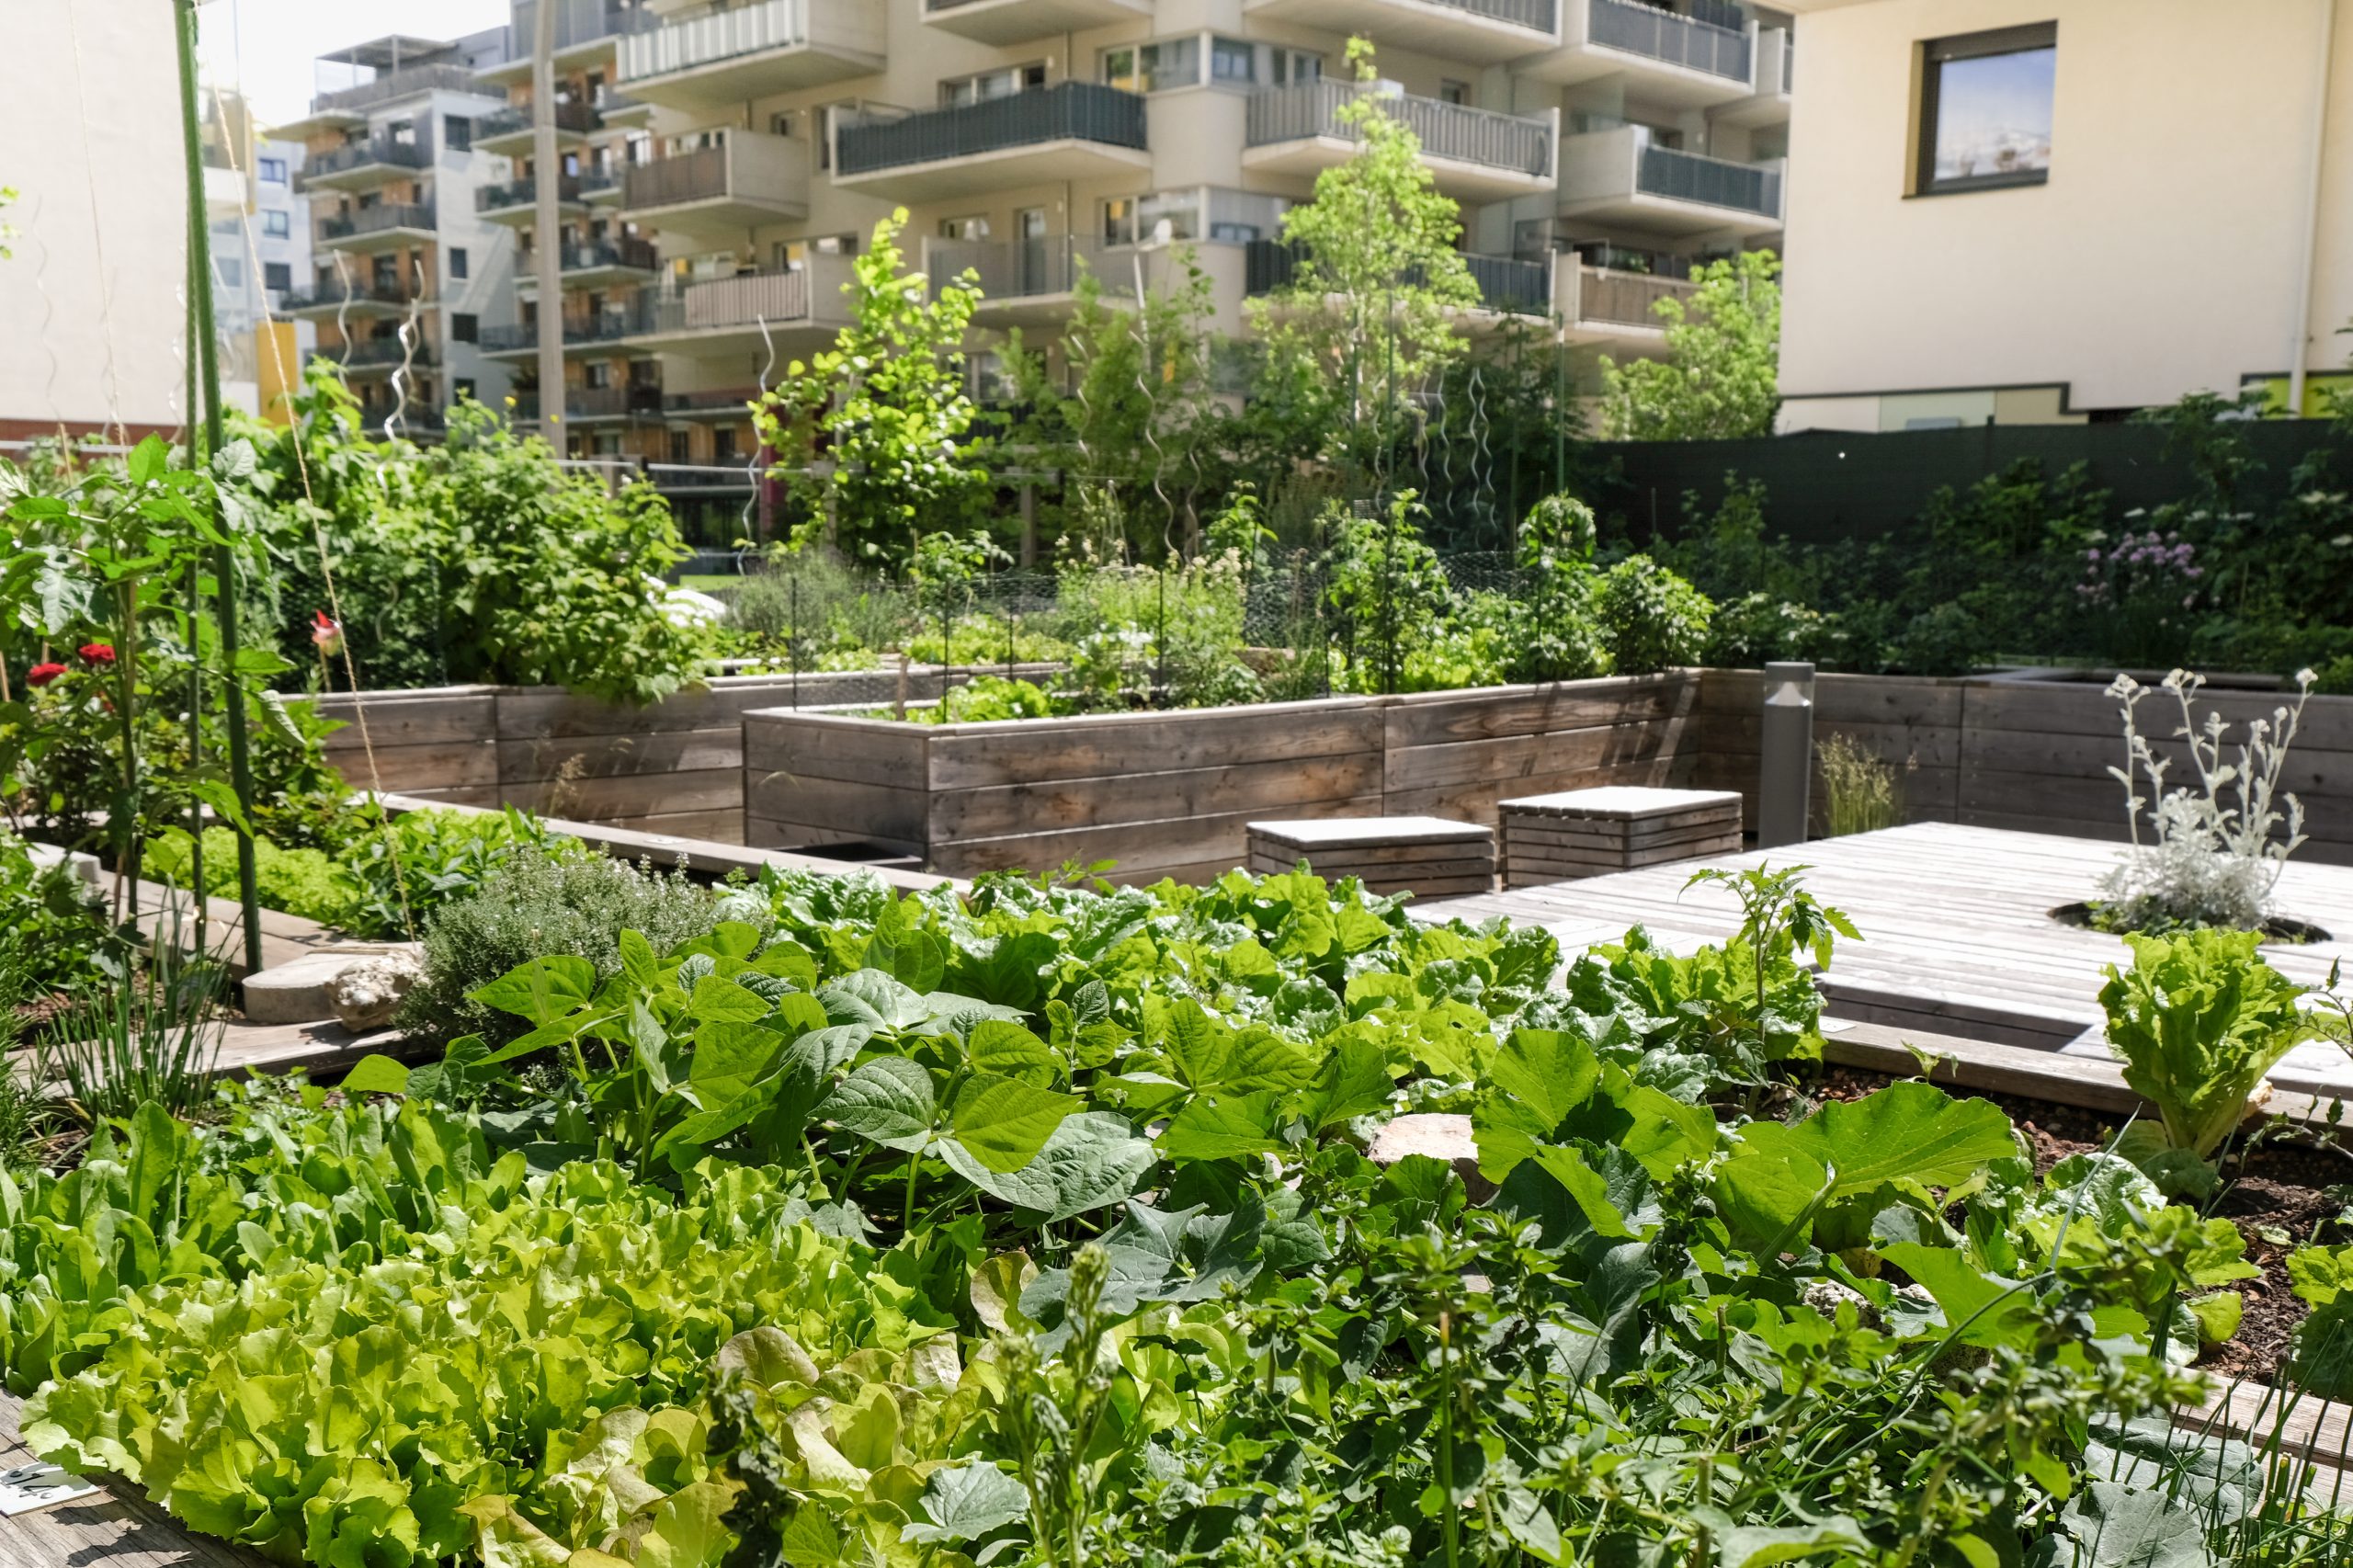 what are two ways an urban garden can improve a local urban community